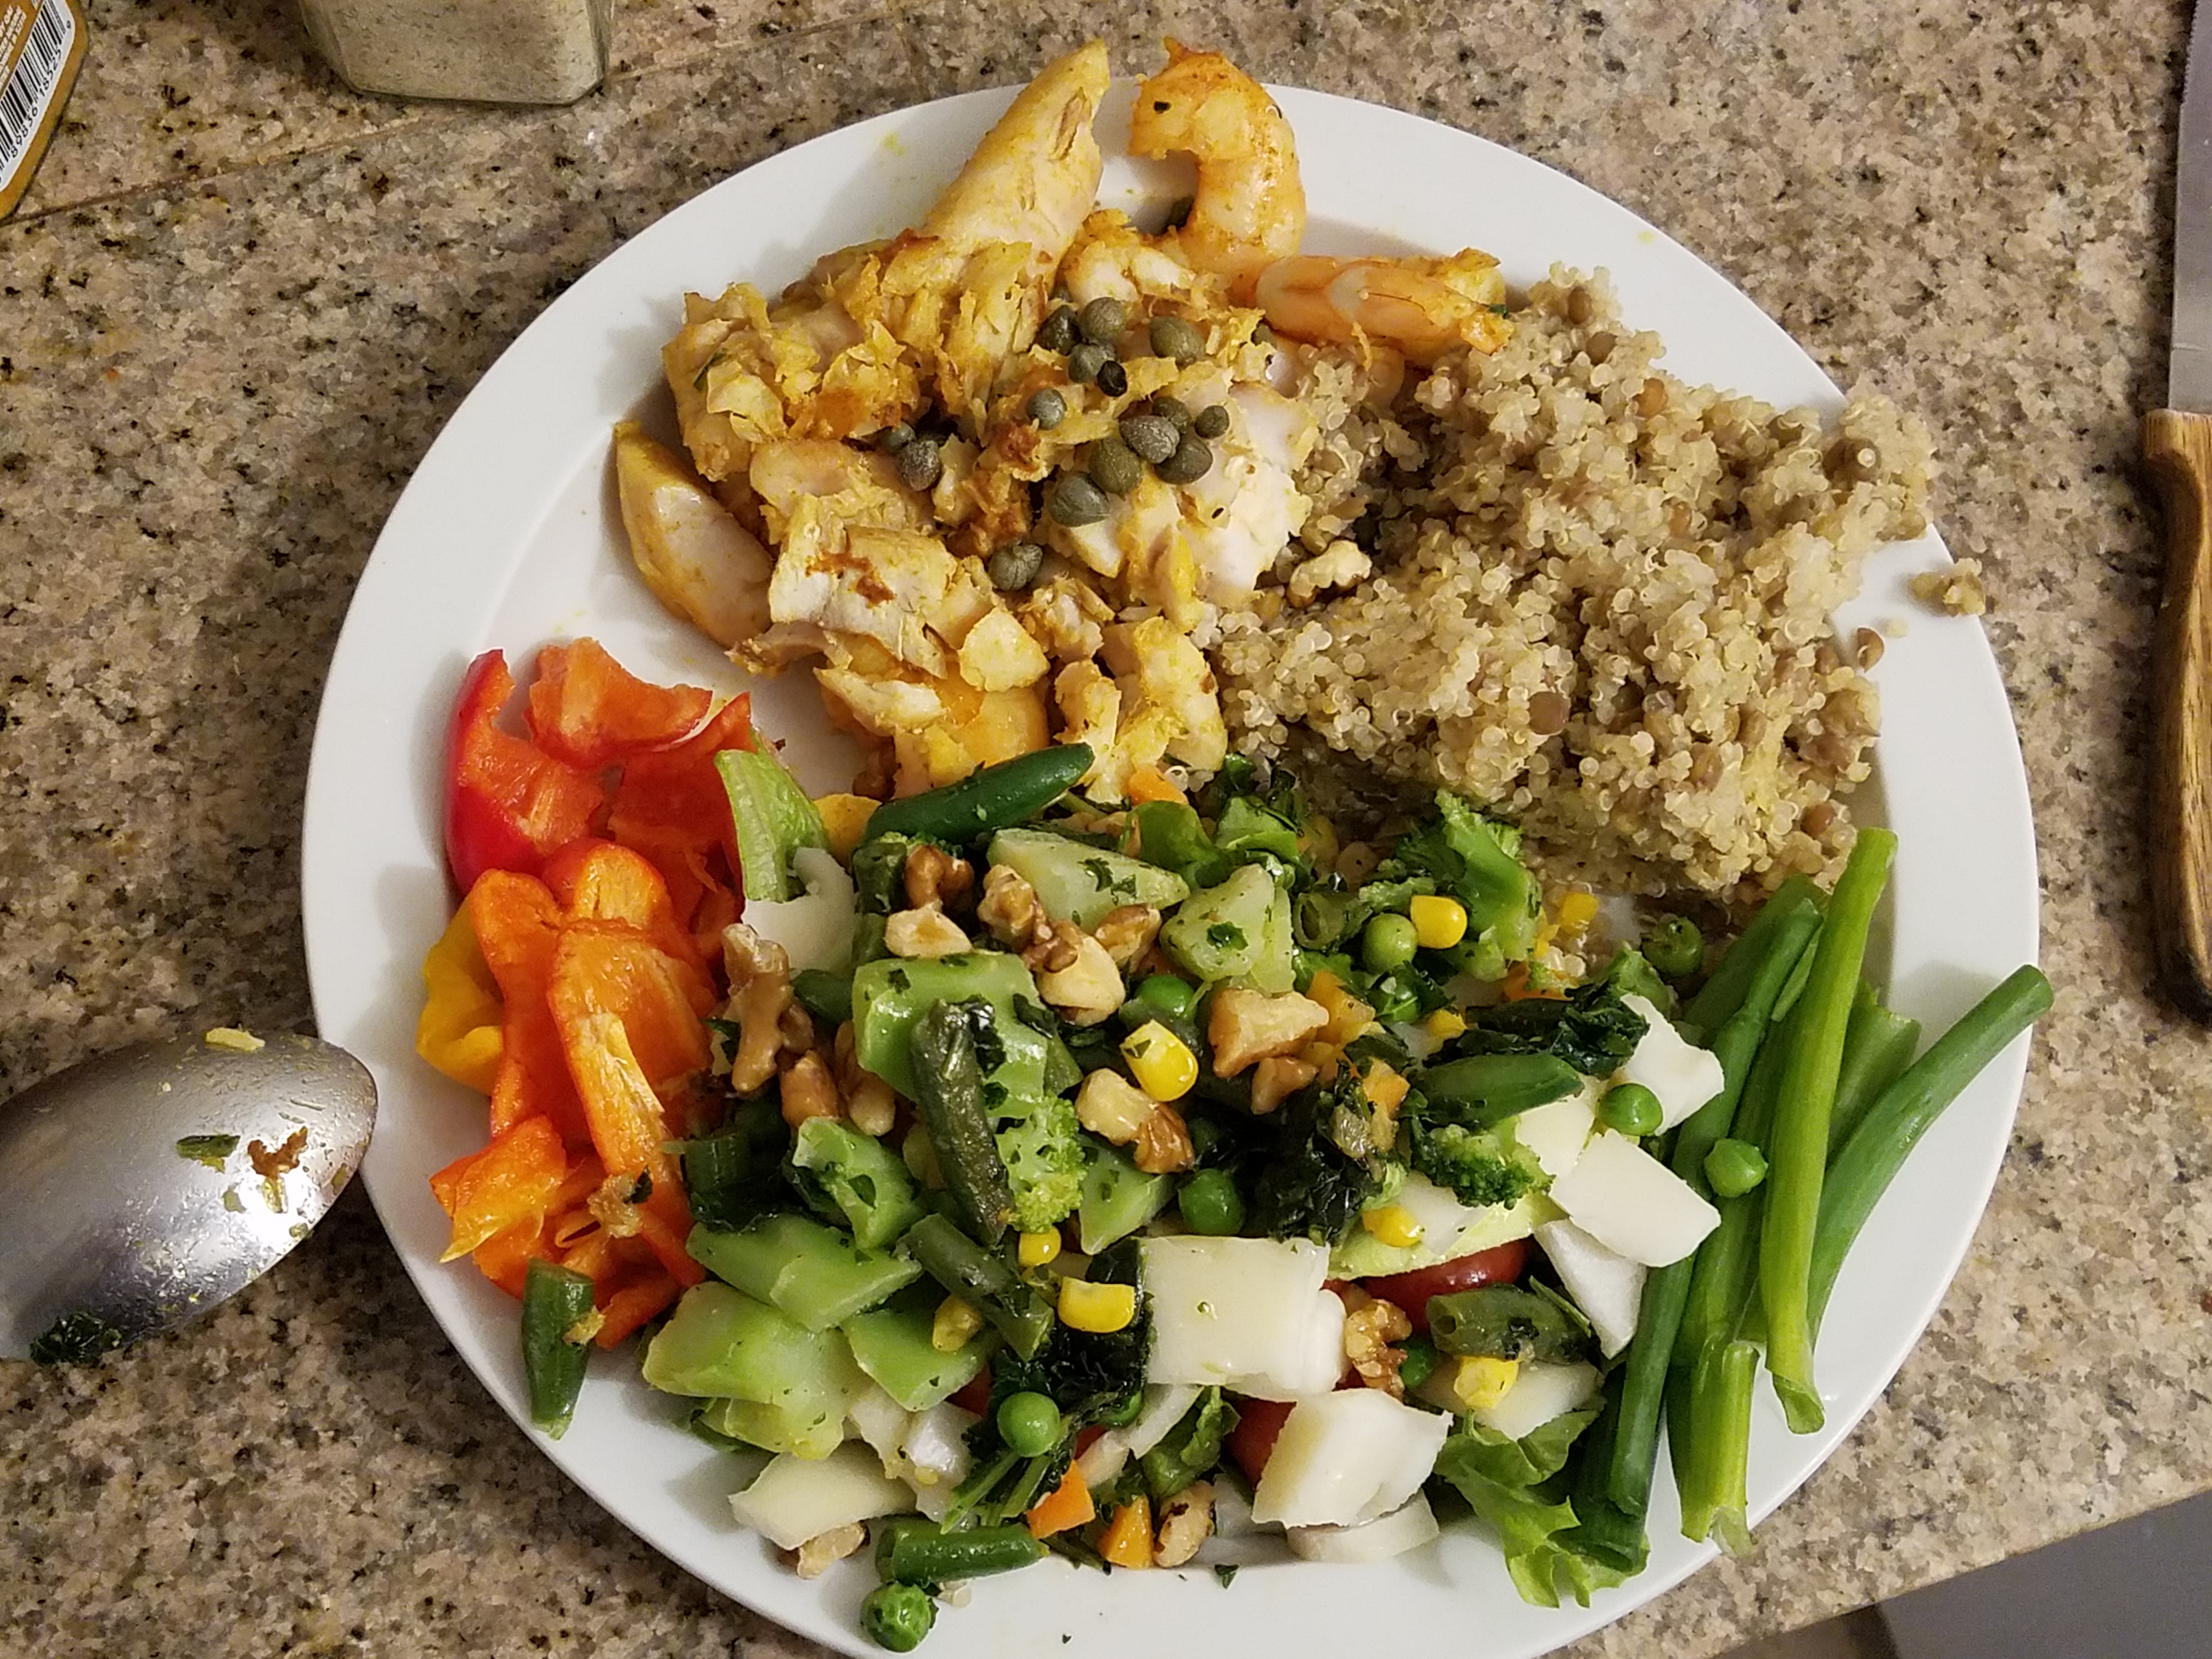 Living well in the 21st century. Limassol, Cyprus. A white plate with veggies - red pepper, cheese, green onions, celery, corn, quinoa, and fish. 